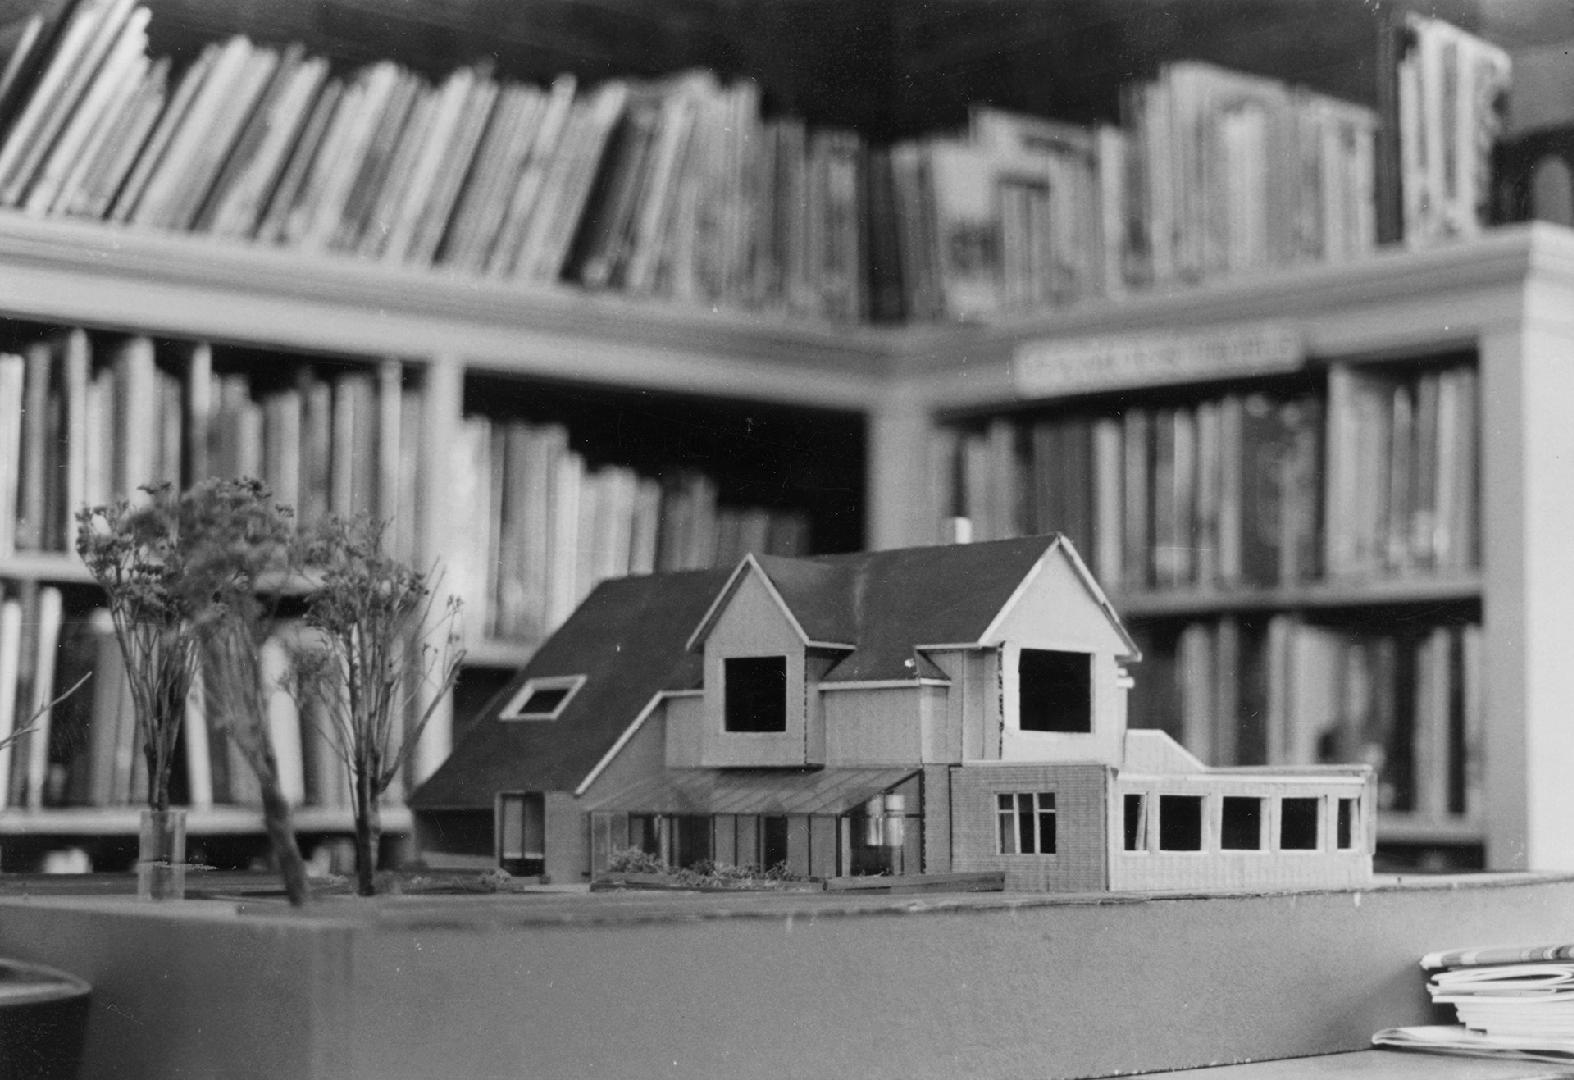 Architectural model of Main Street library renovation